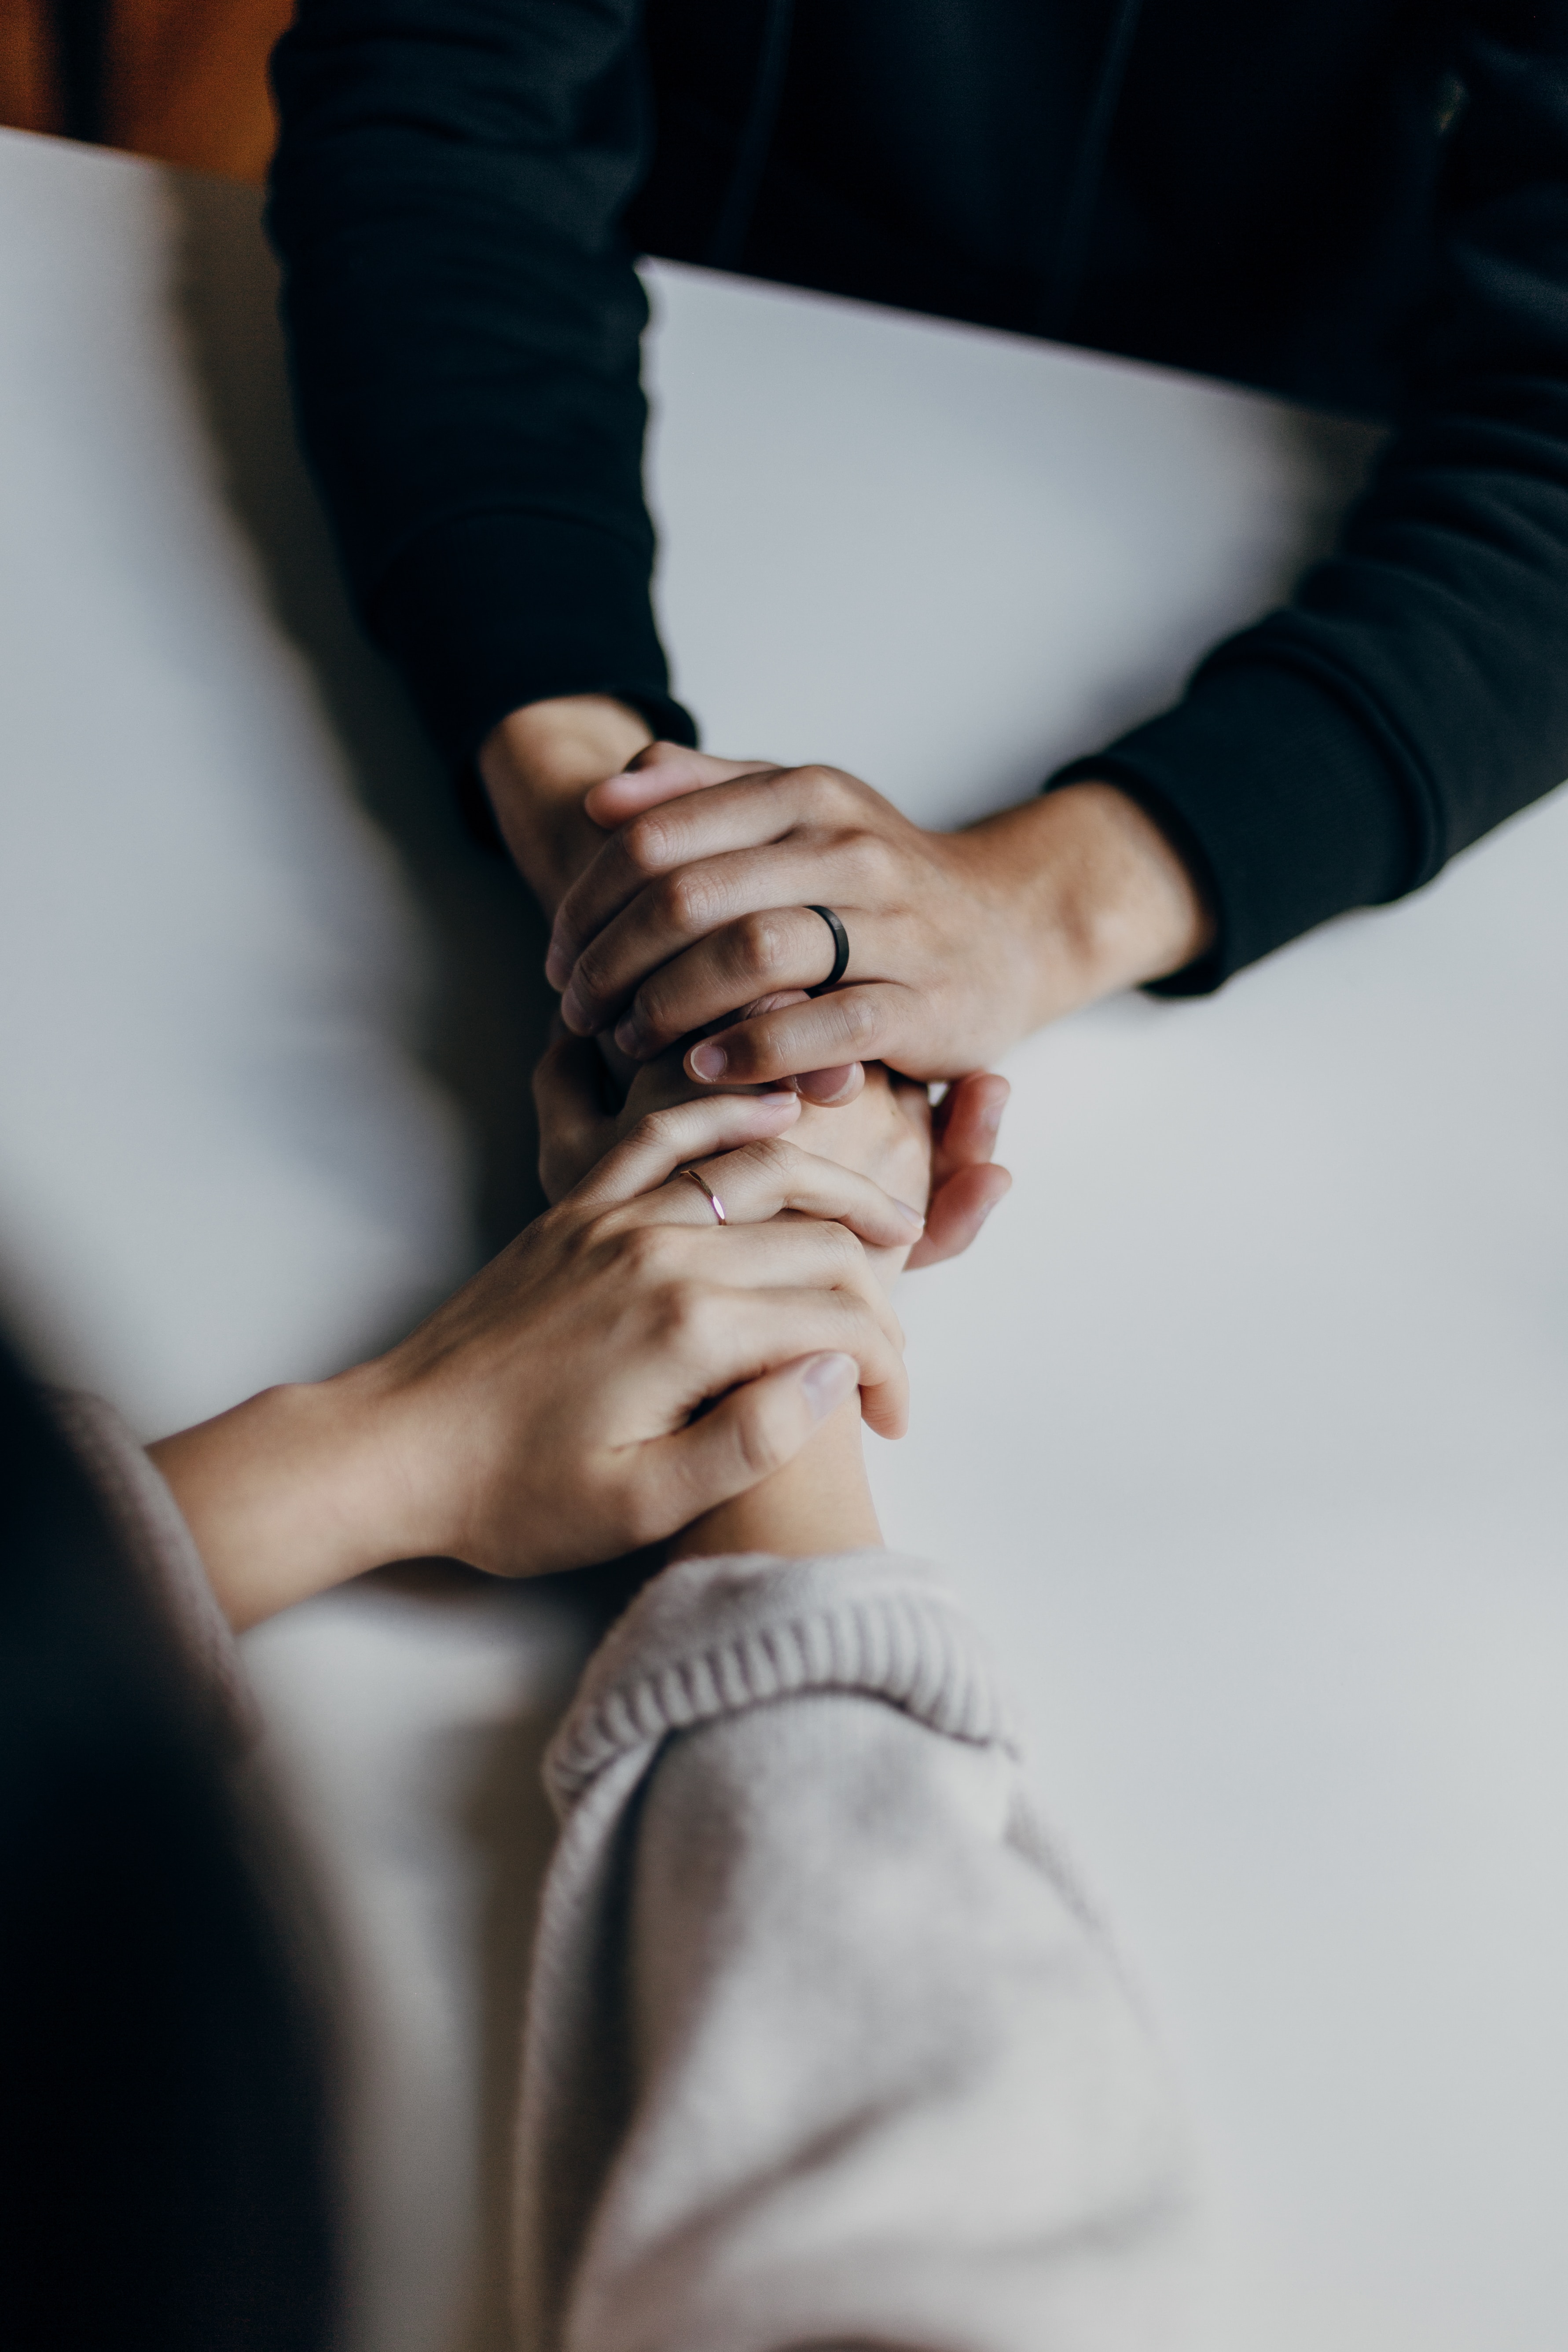 Two individuals comforting each other via putting their hands together over a table. │ Source: Unsplash